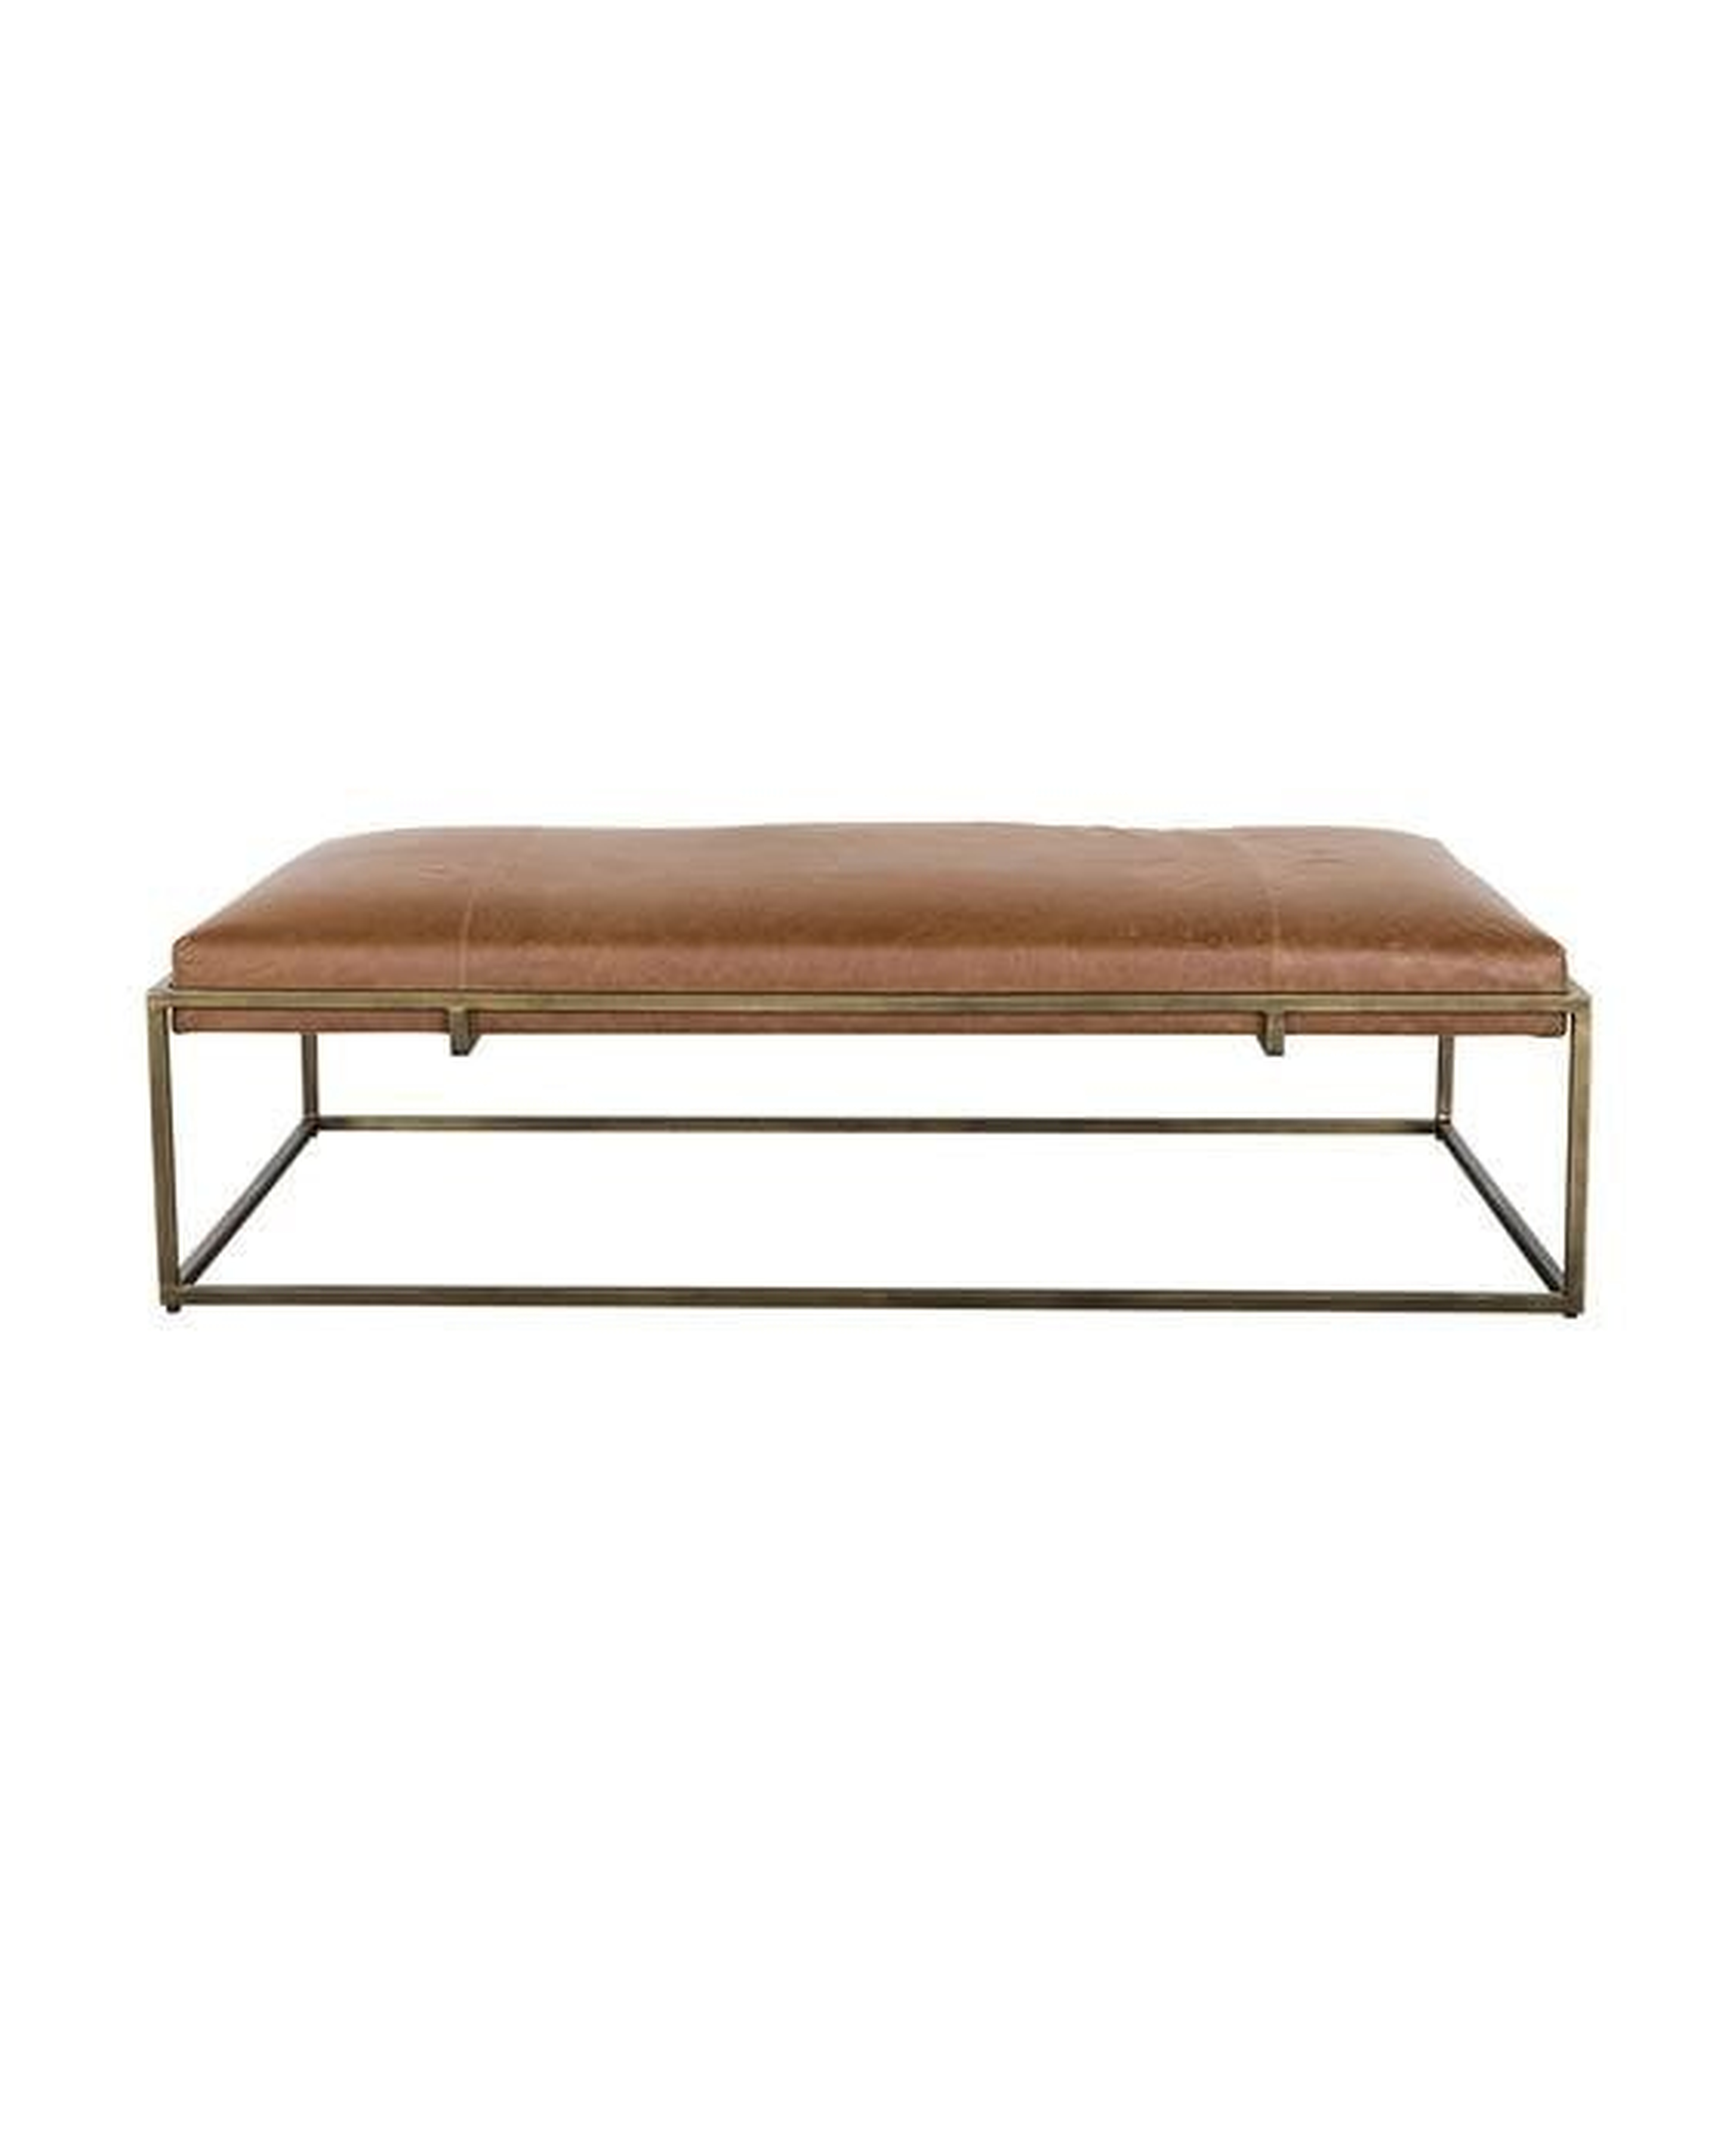 Harlow Leather Bench, Leather & Antique Brass - McGee & Co.